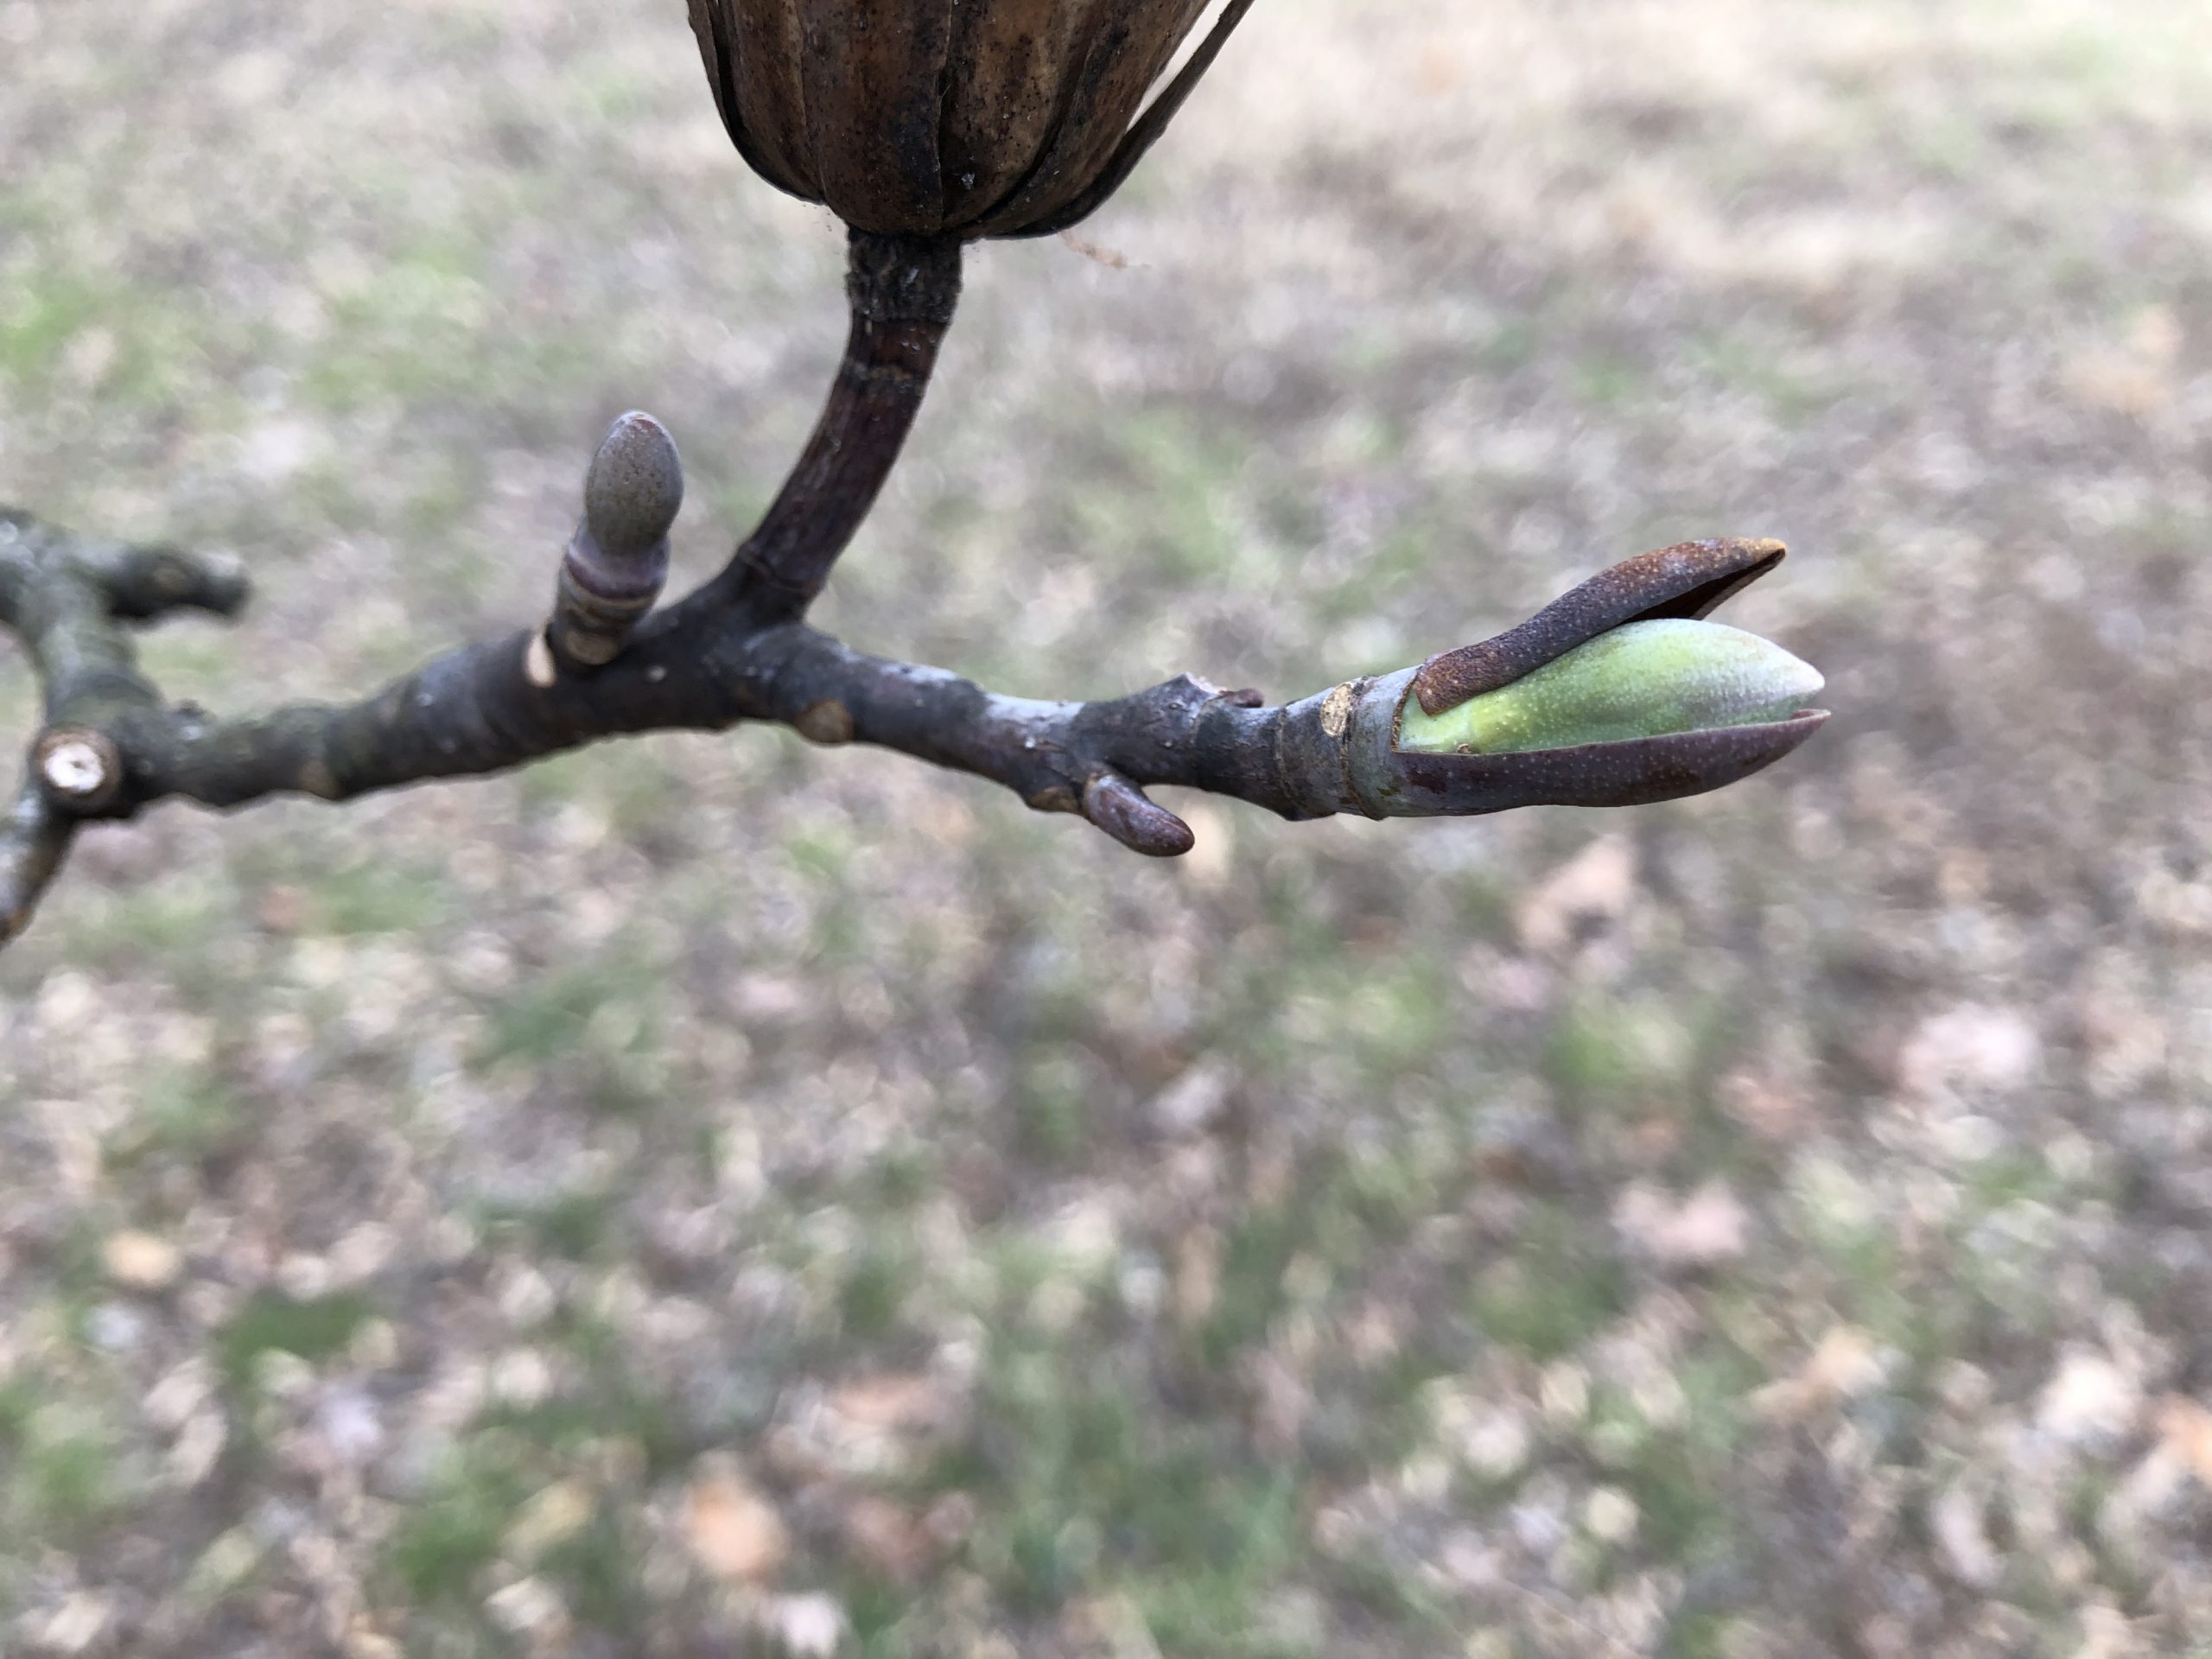 The buds of Liriodendron tulipifera or Tulip Tree are helpful for winter tree ID